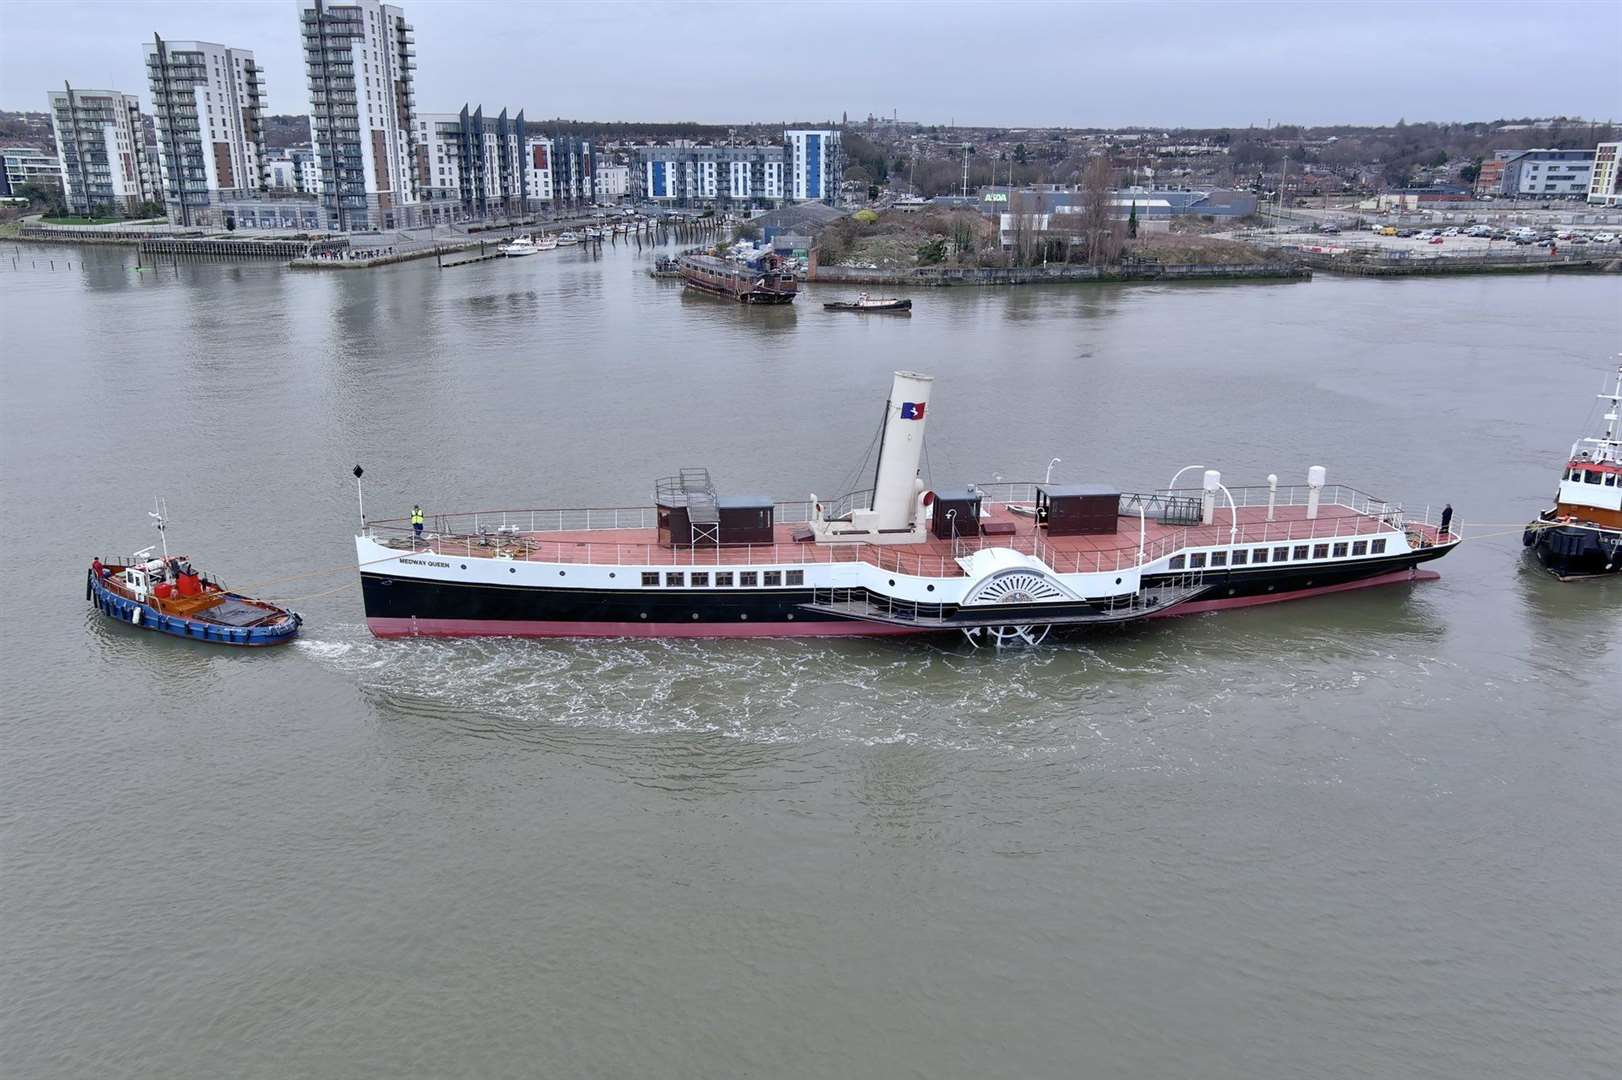 The Medway Queen being towed back to Gillingham Pier Picture: Geoff Watkins/Aerial Imaging South East